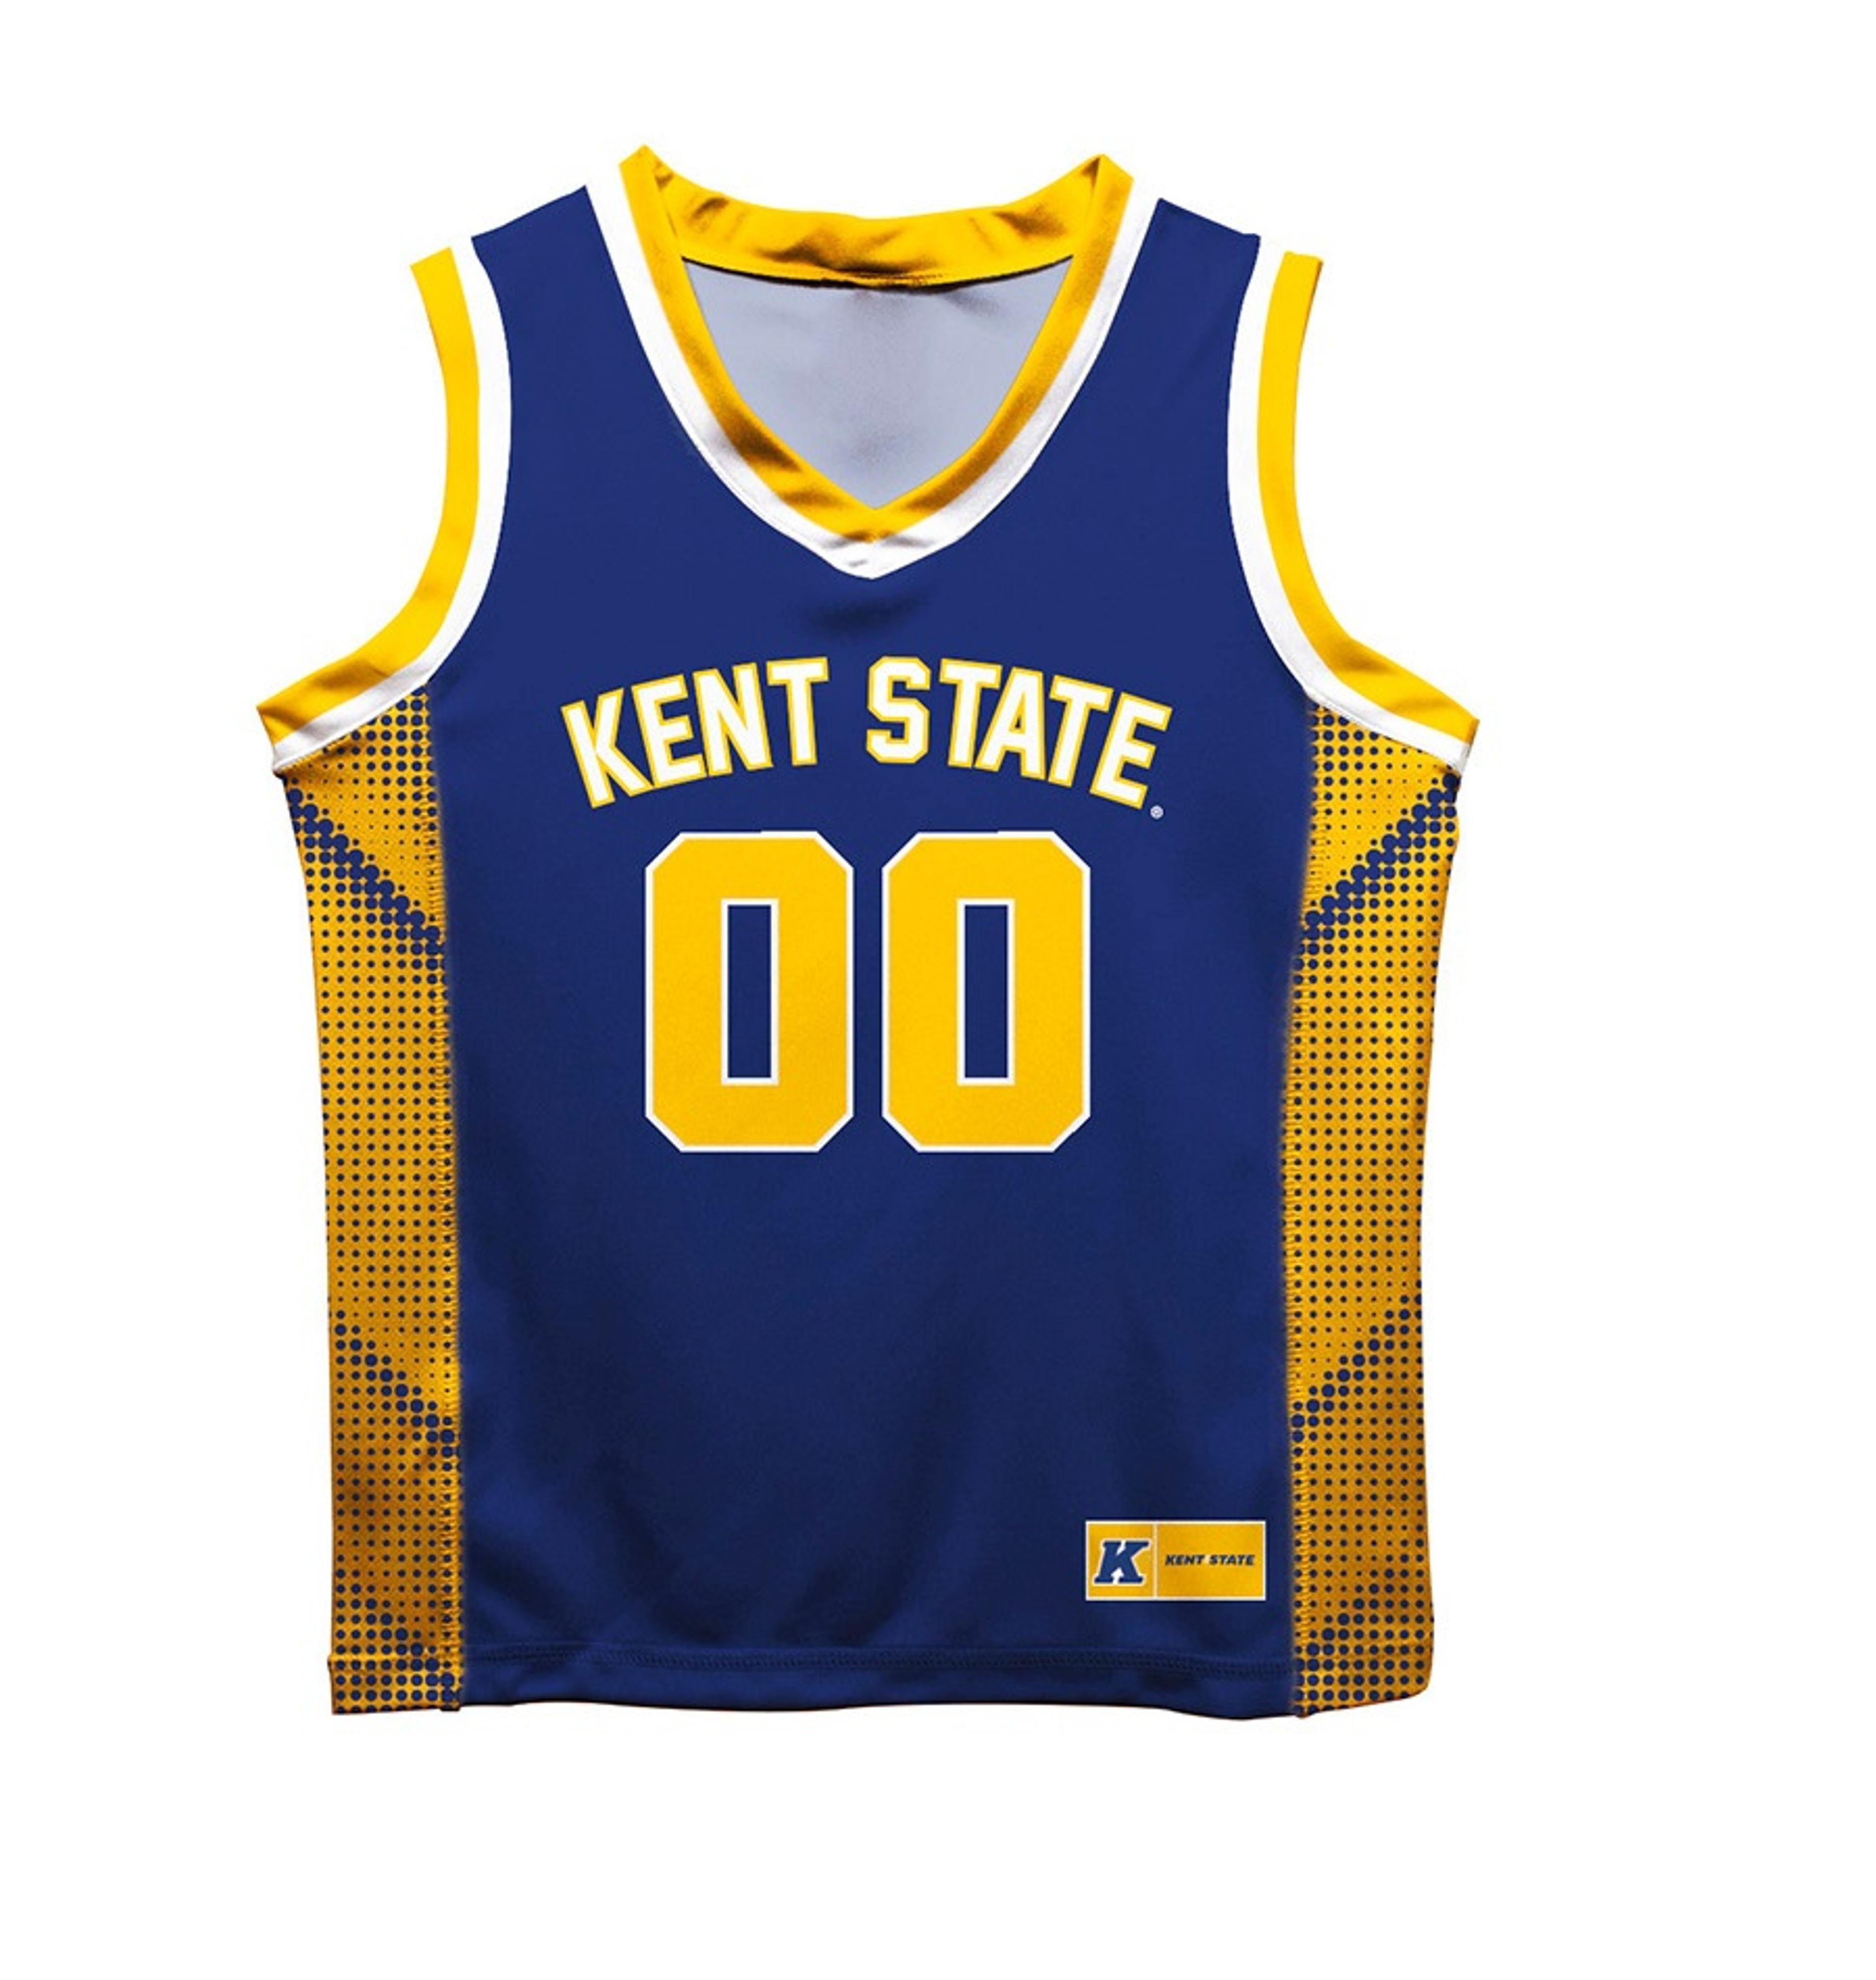 Kent State Navy  Youth Basketball Jersey